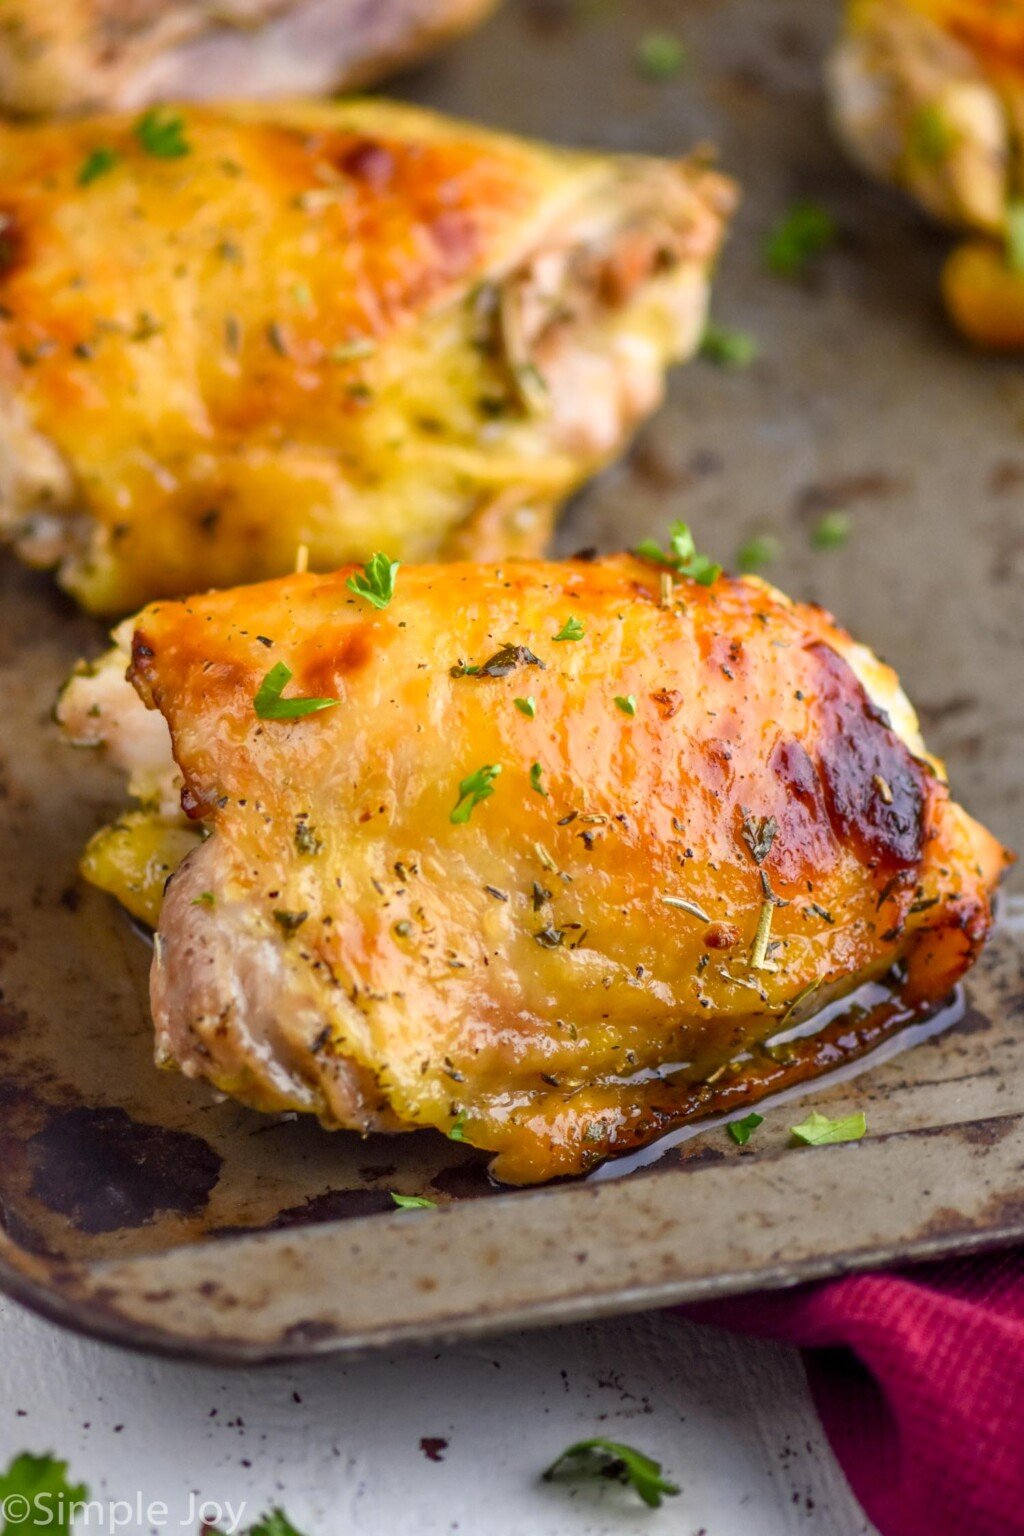 Oven Baked Chicken Thighs - Simple Joy